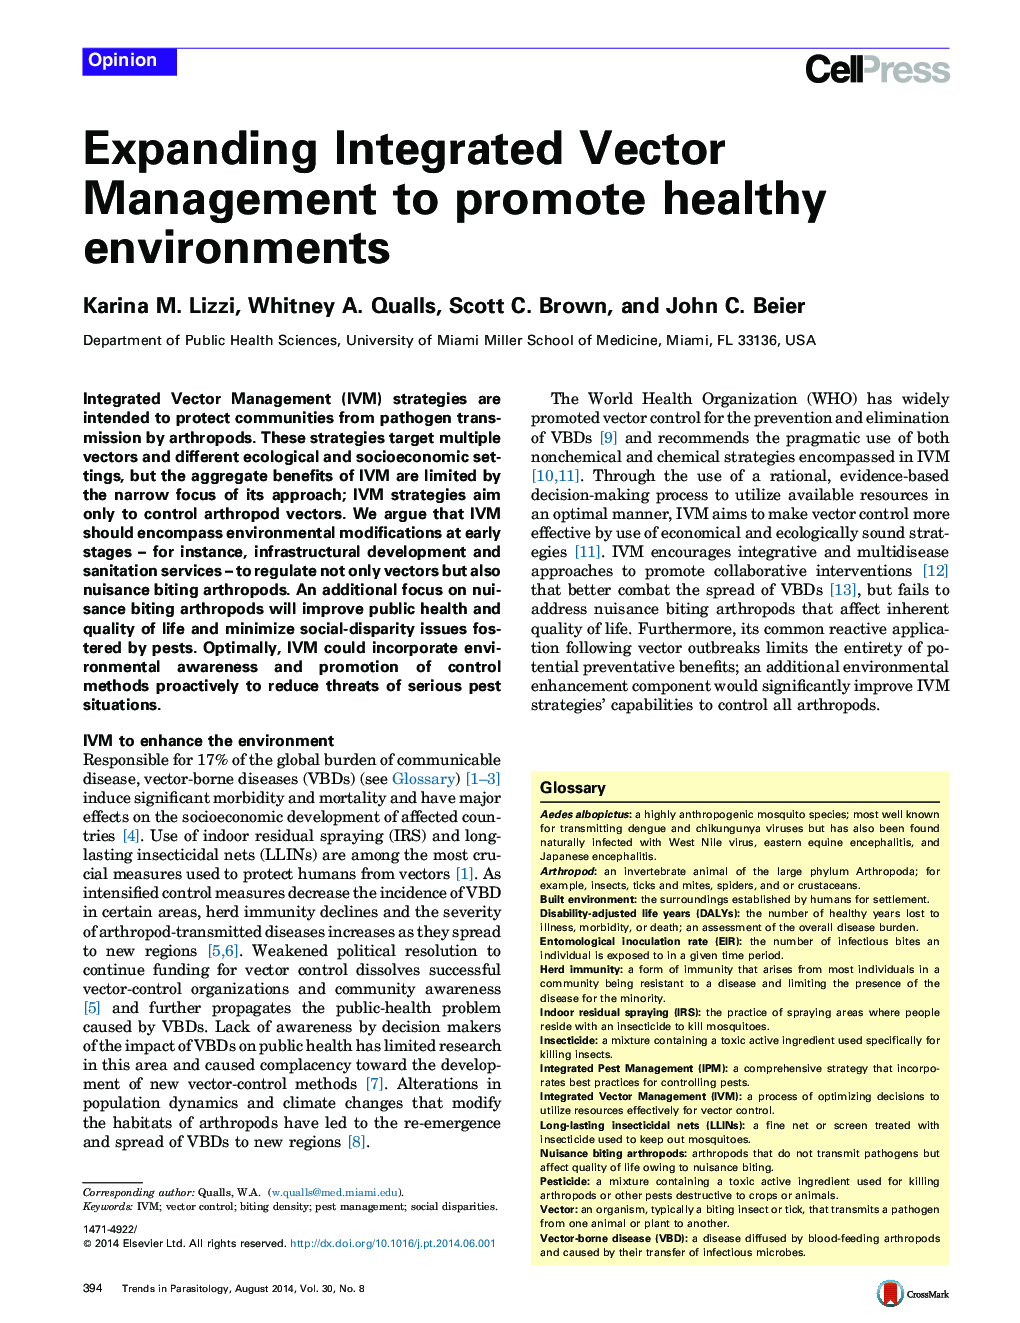 Expanding Integrated Vector Management to promote healthy environments